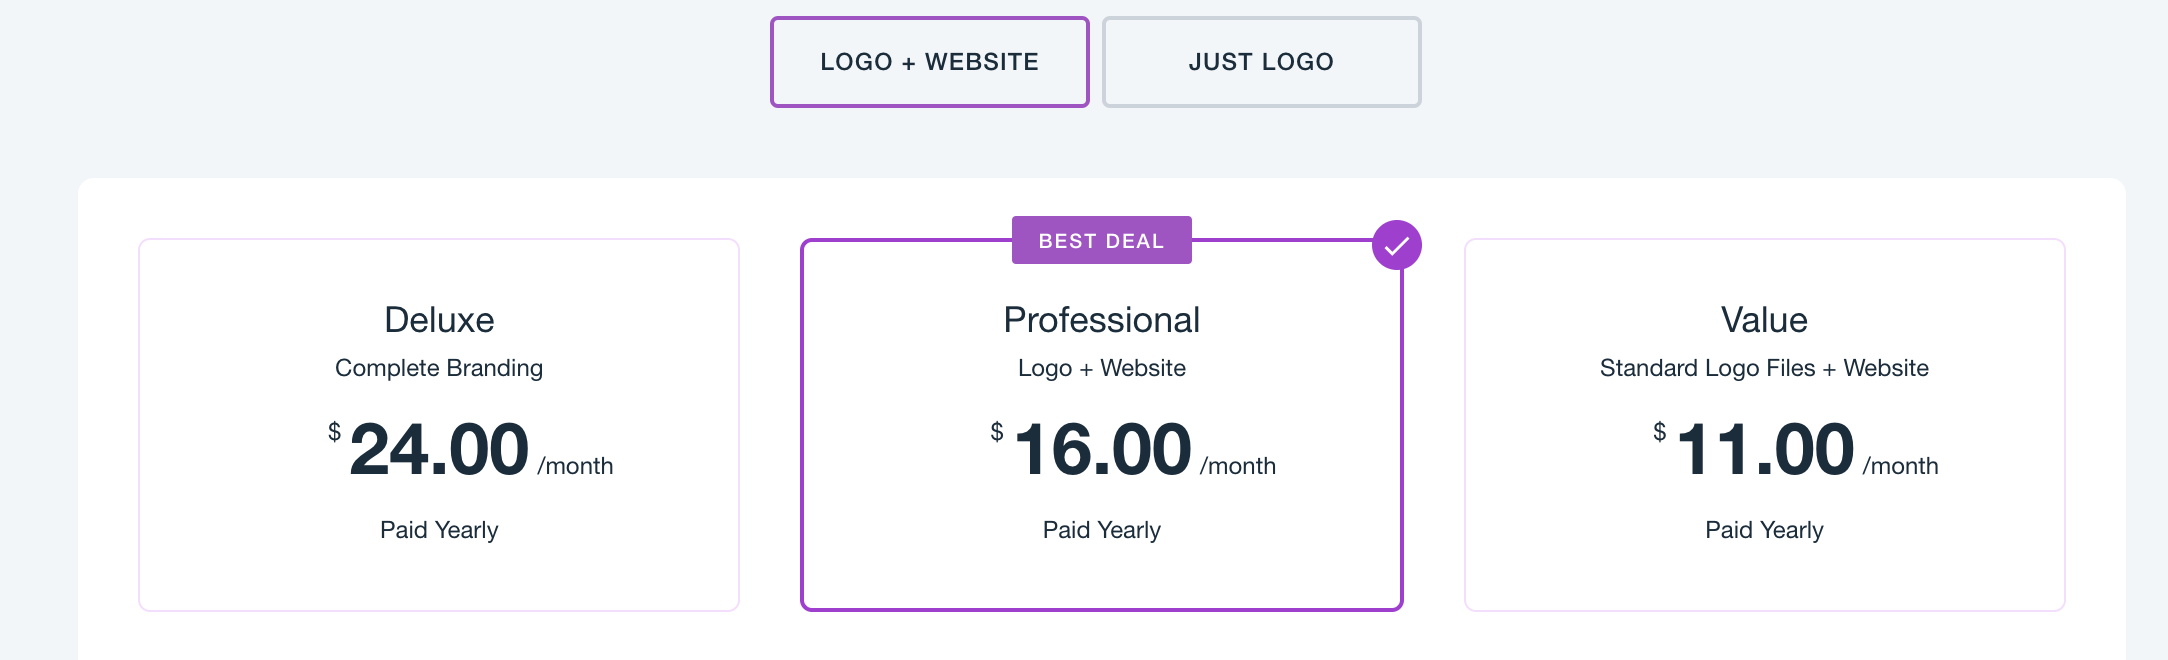 Wix Logo Maker pricing - yearly prices